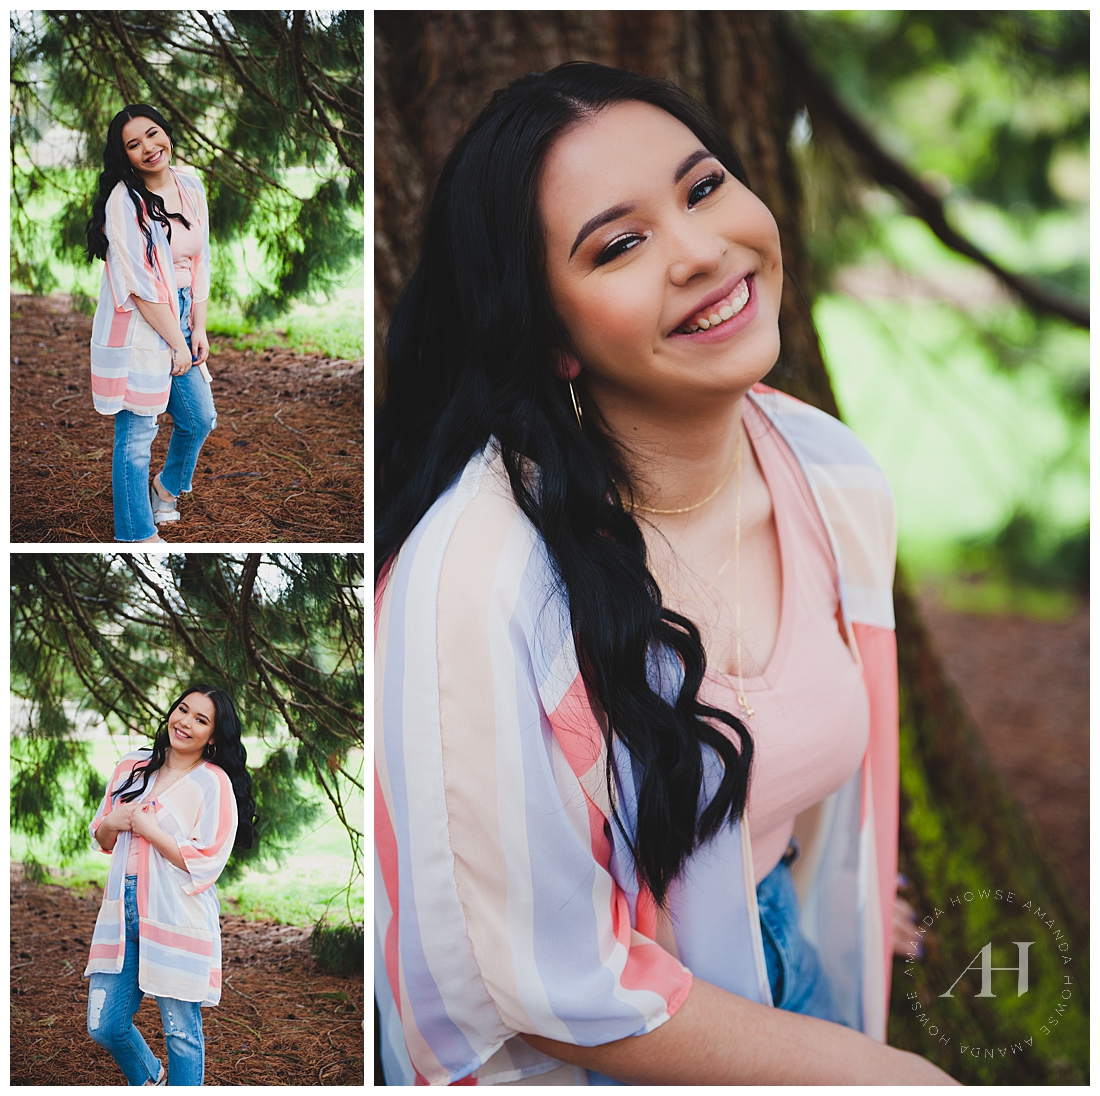 Spring Senior Portraits in Tacoma Photographed by Amanda Howse